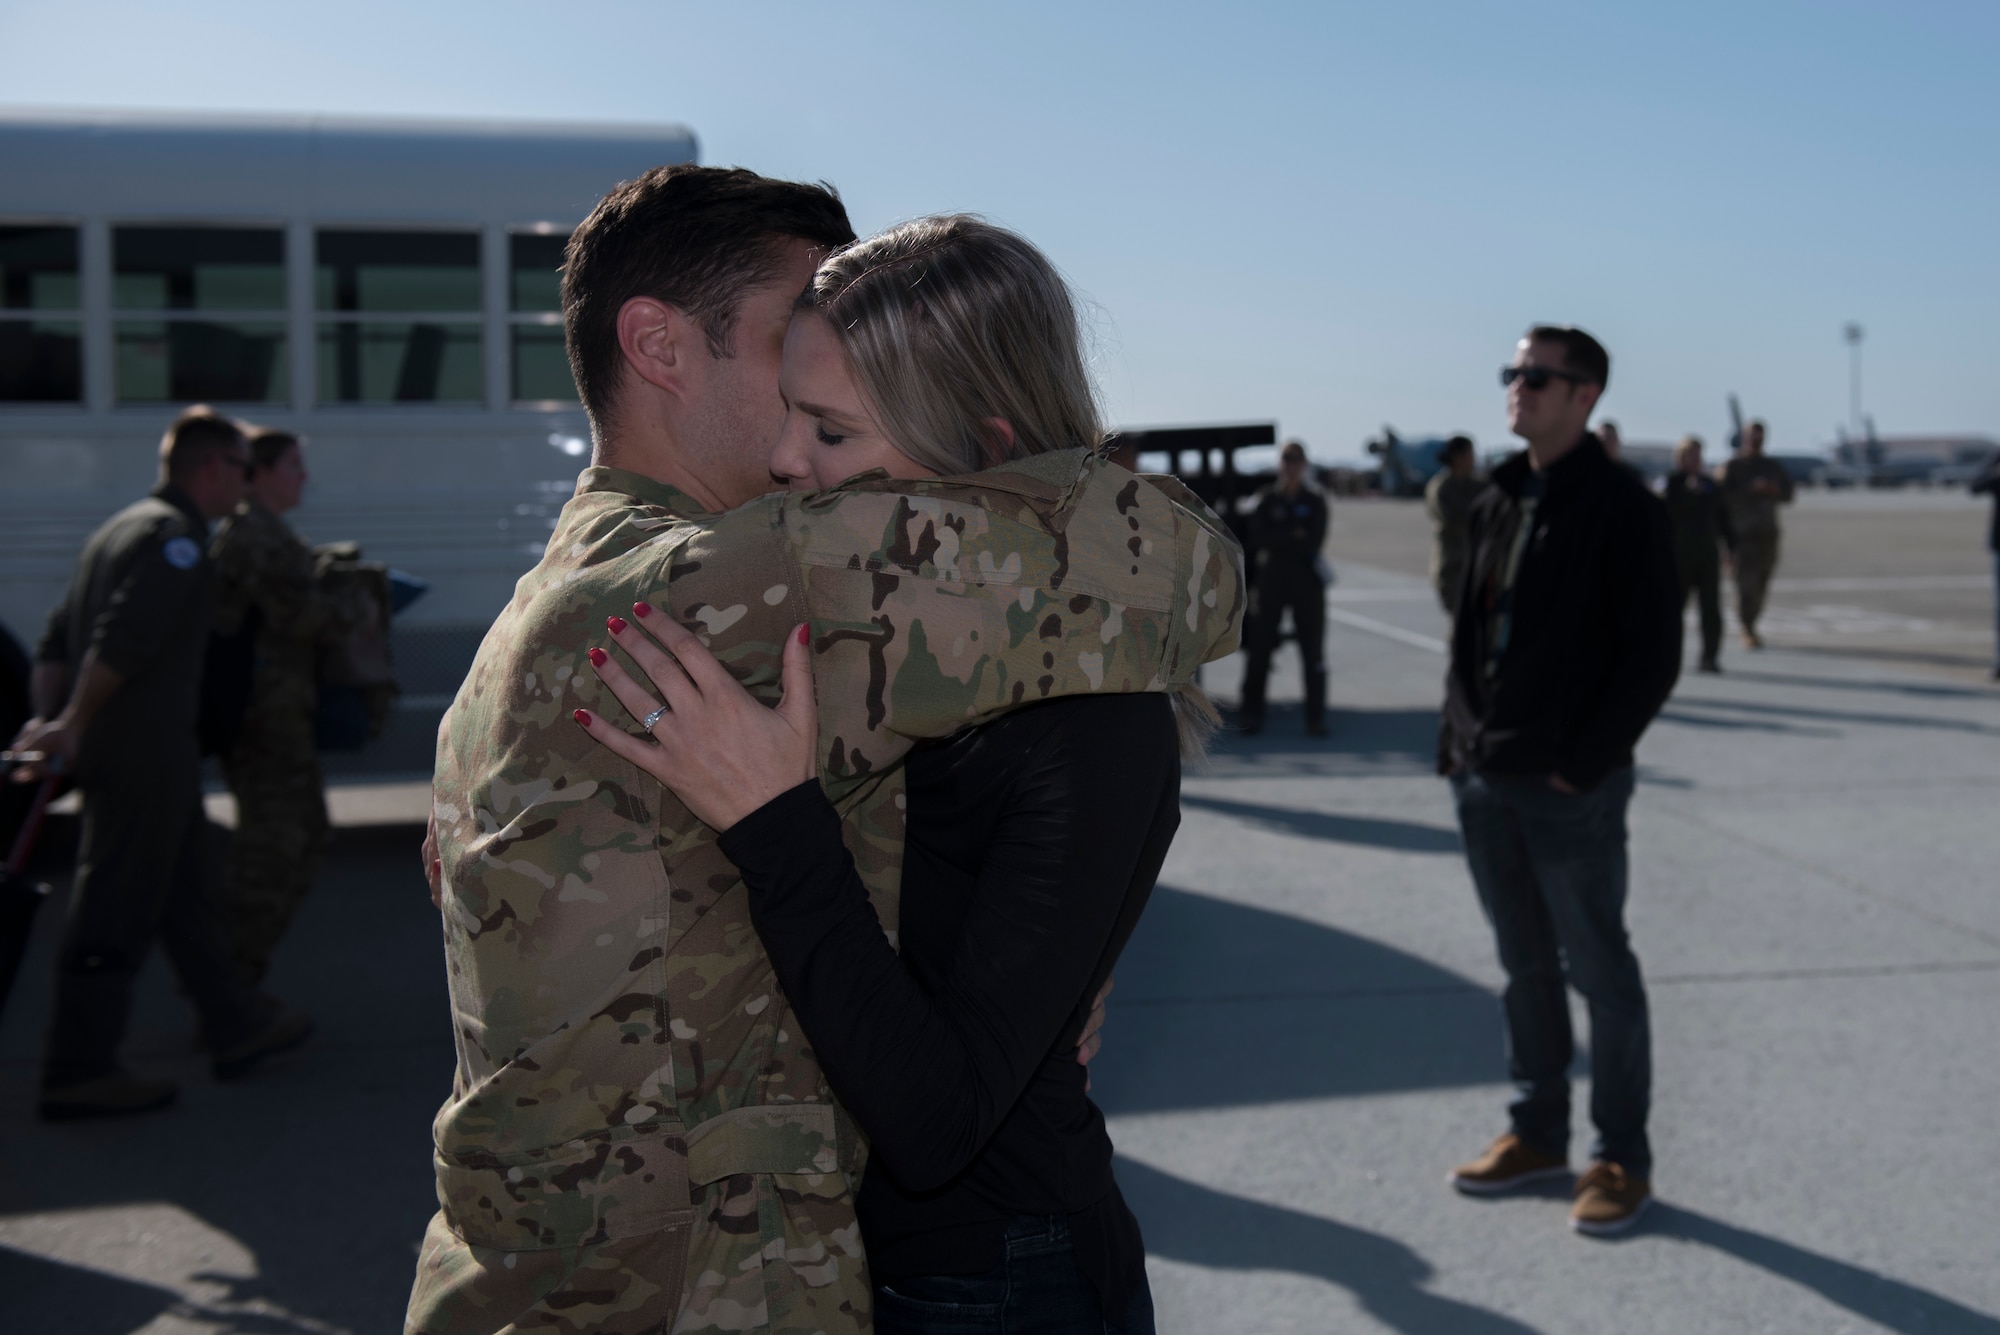 U.S. Air Force Capt. Cory Hume, 6th Air Refueling Squadron assistant flight commander, embraces Jay Hume, his wife, Nov. 21, 2019, at Travis Air Force Base, California. Cory was part of a KC-10 crew that returned to Travis AFB for the holidays after supporting operations in Southwest Asia for two months. (U.S. Air Force photo by Airman 1st Class Cameron Otte)